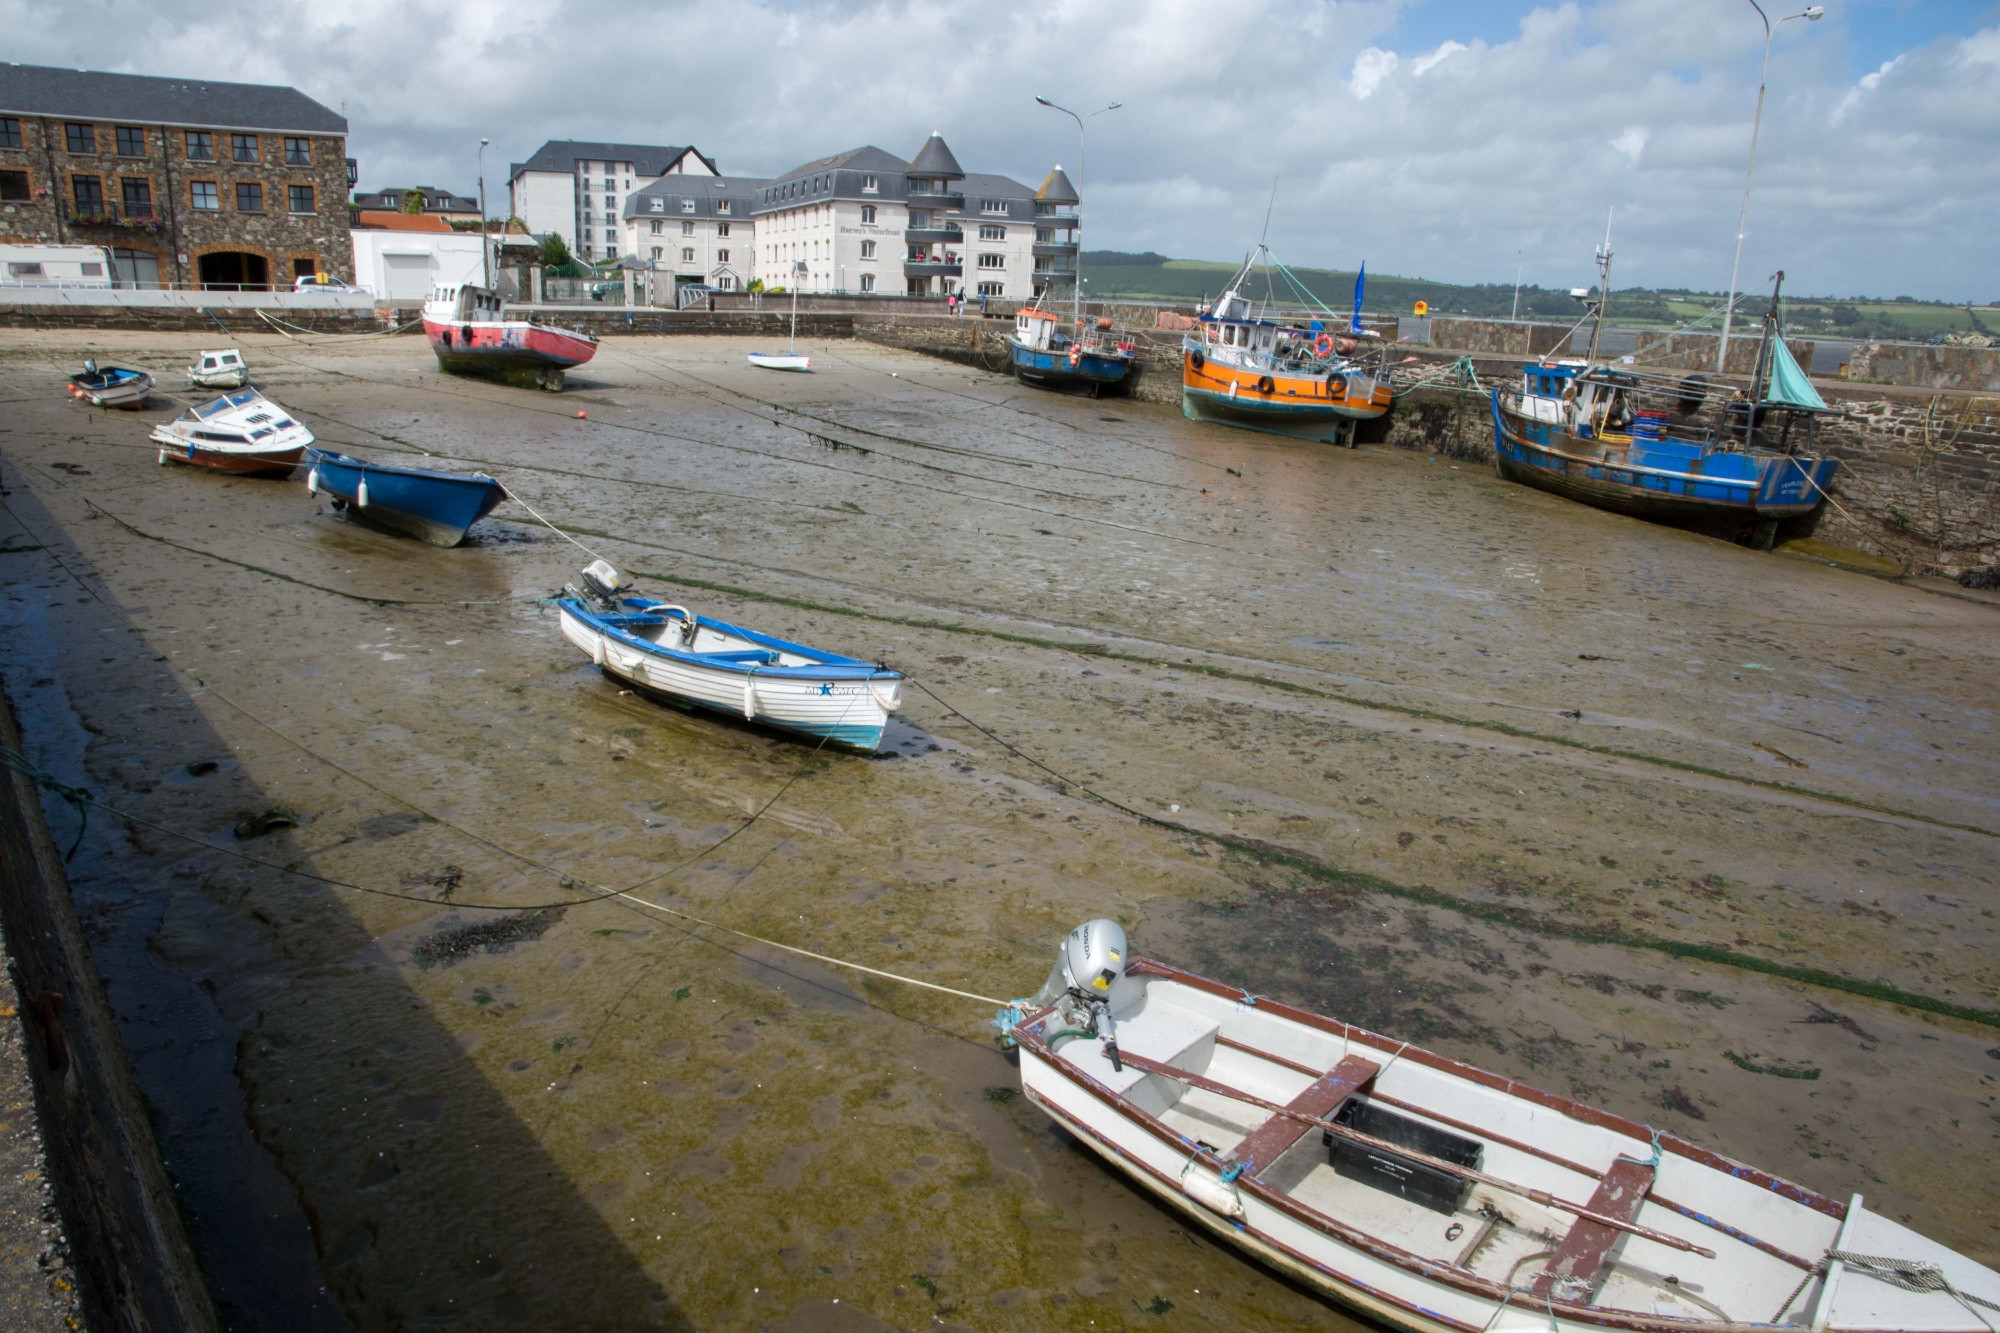 Youghal Harbor at low tide